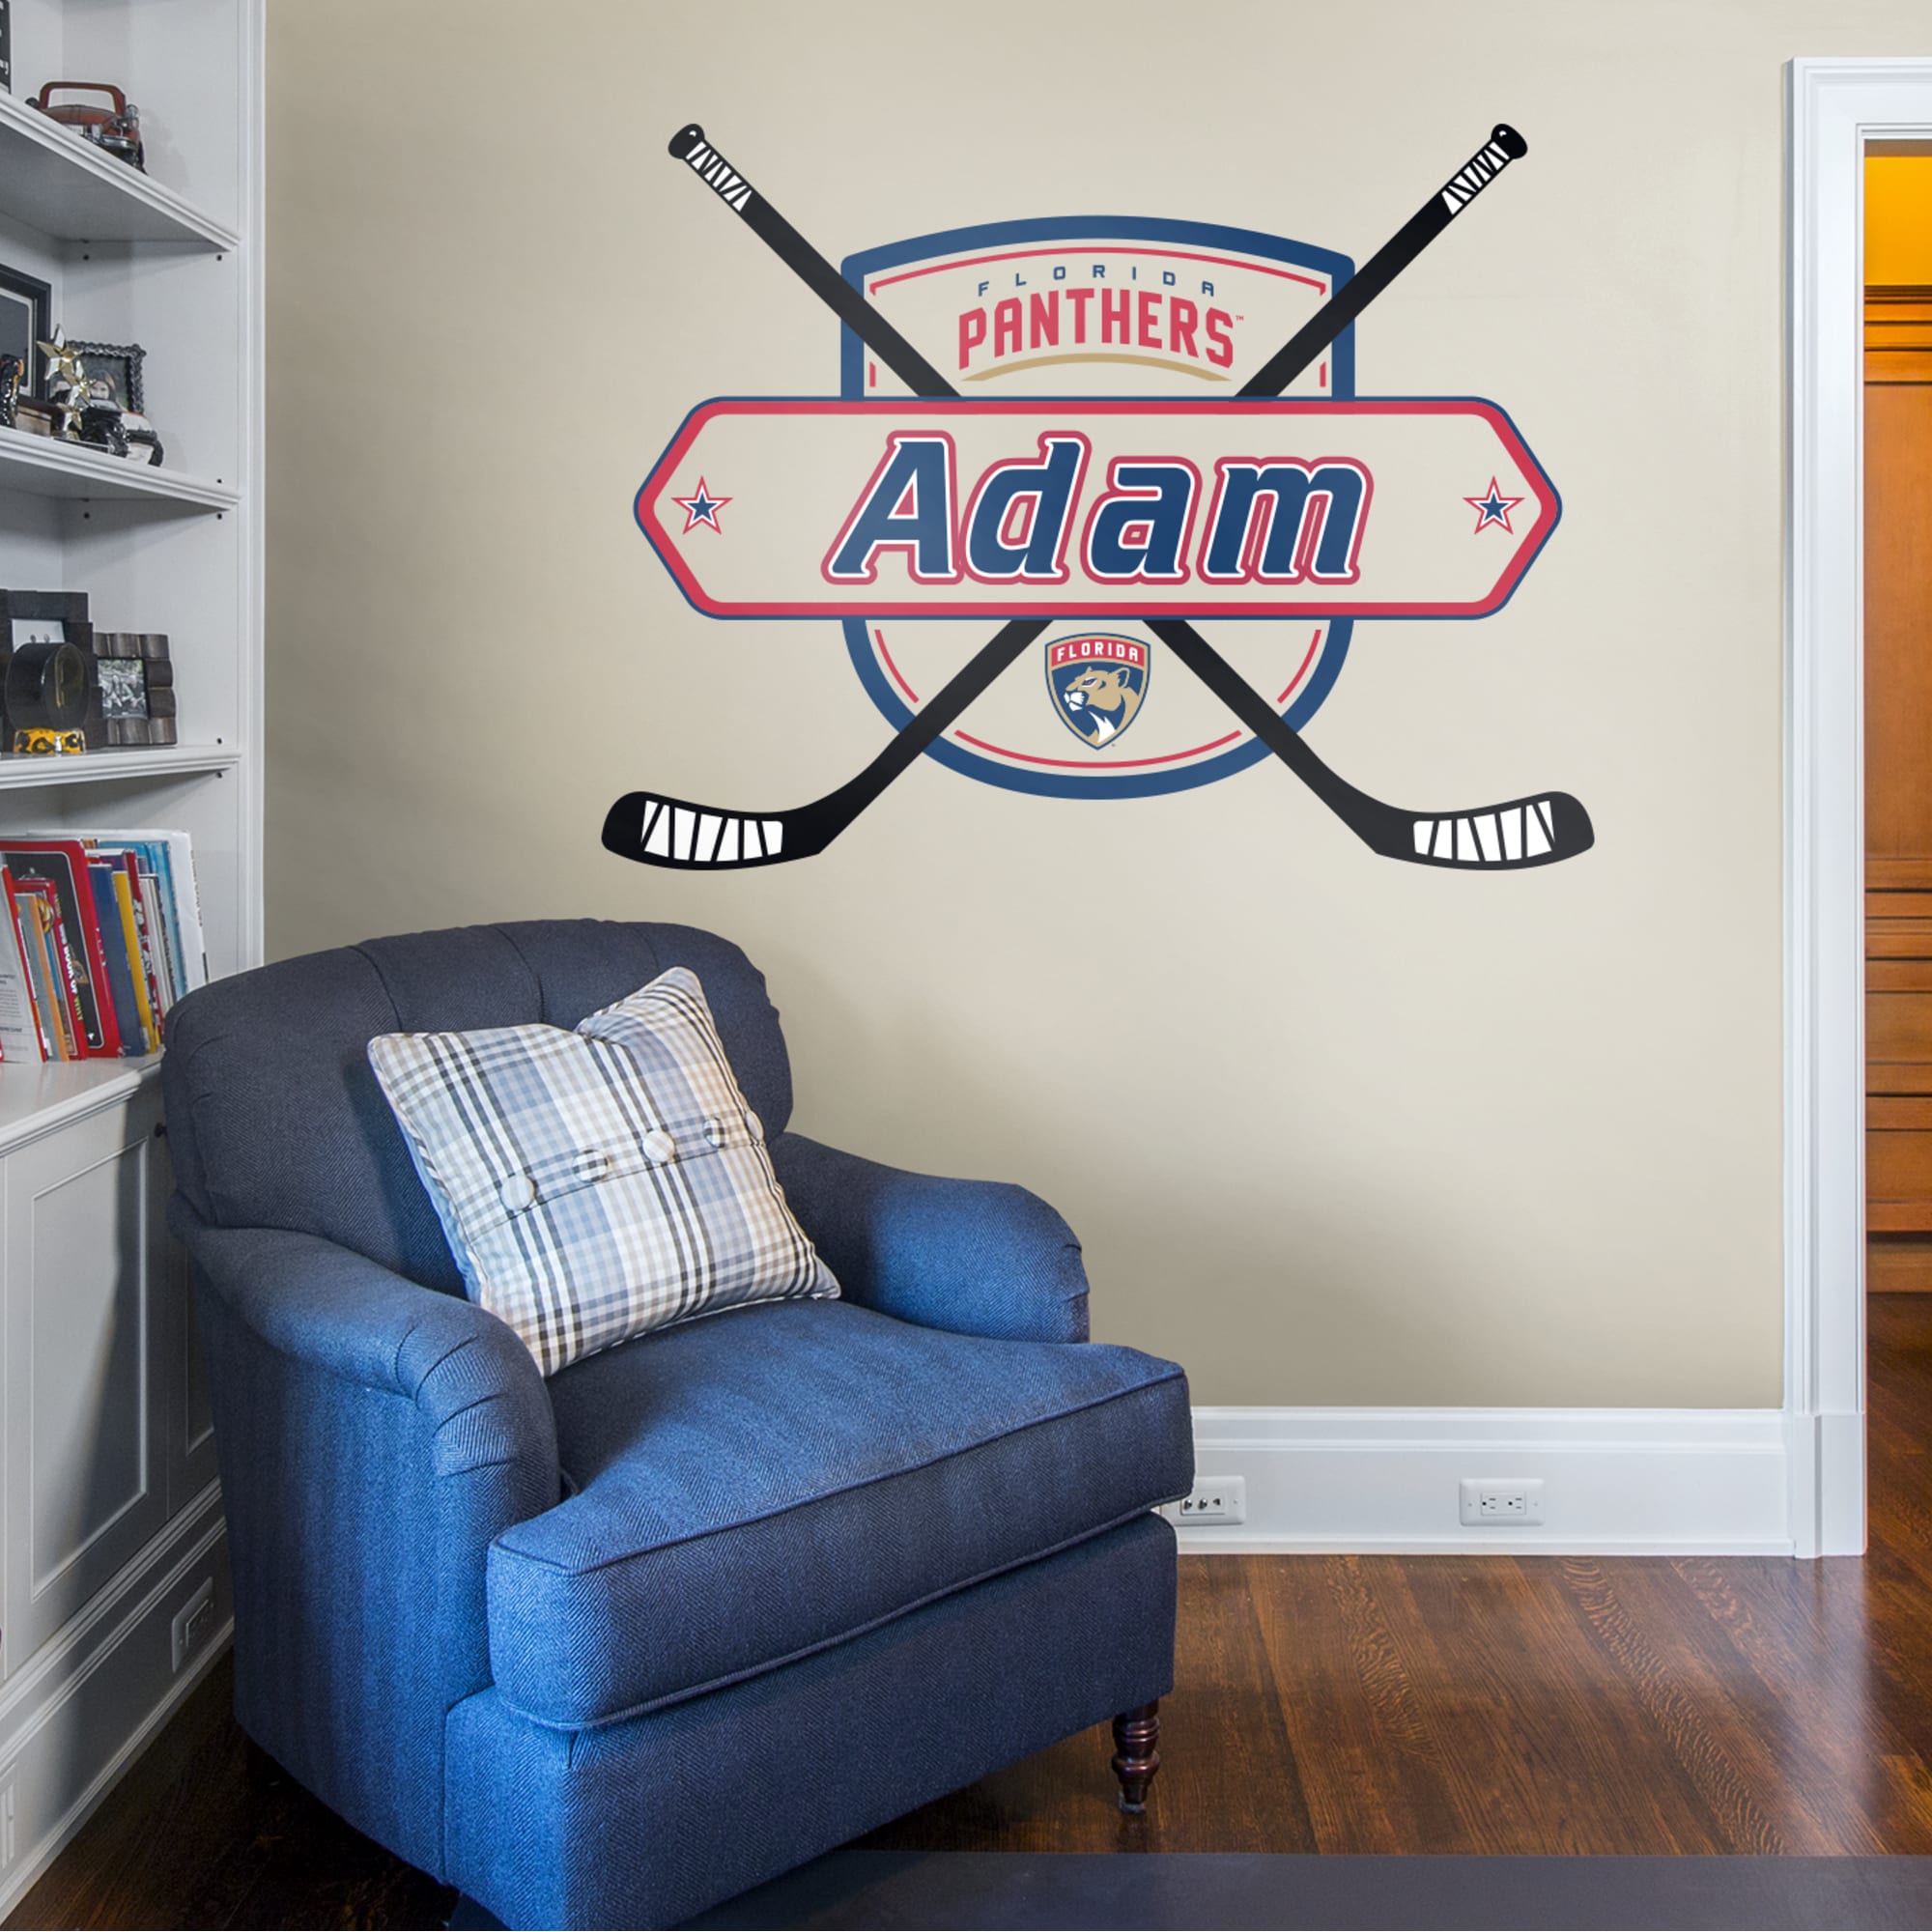 Florida Panthers: Logo - Officially Licensed NHL Removable Wall Decal 39.5"W x 52.0"H by Fathead | Vinyl